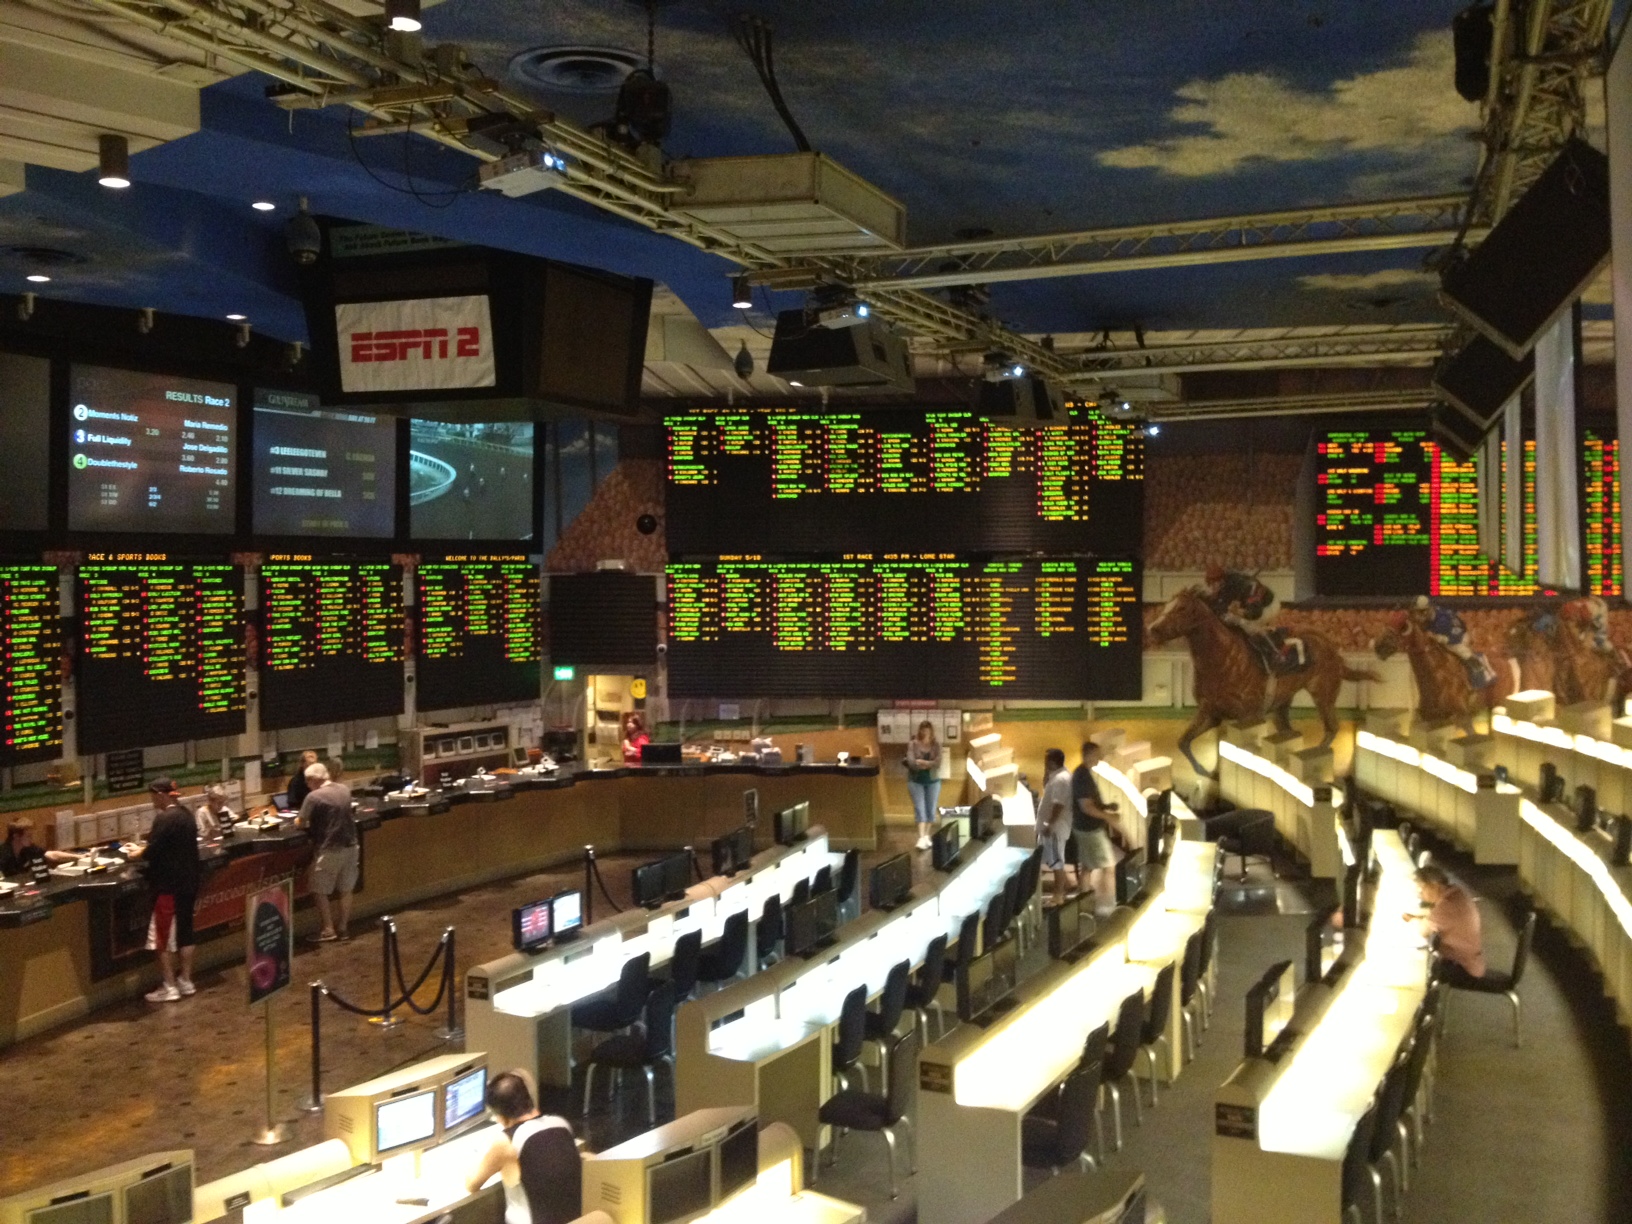 10 Best Race and Sports Books in Las Vegas 